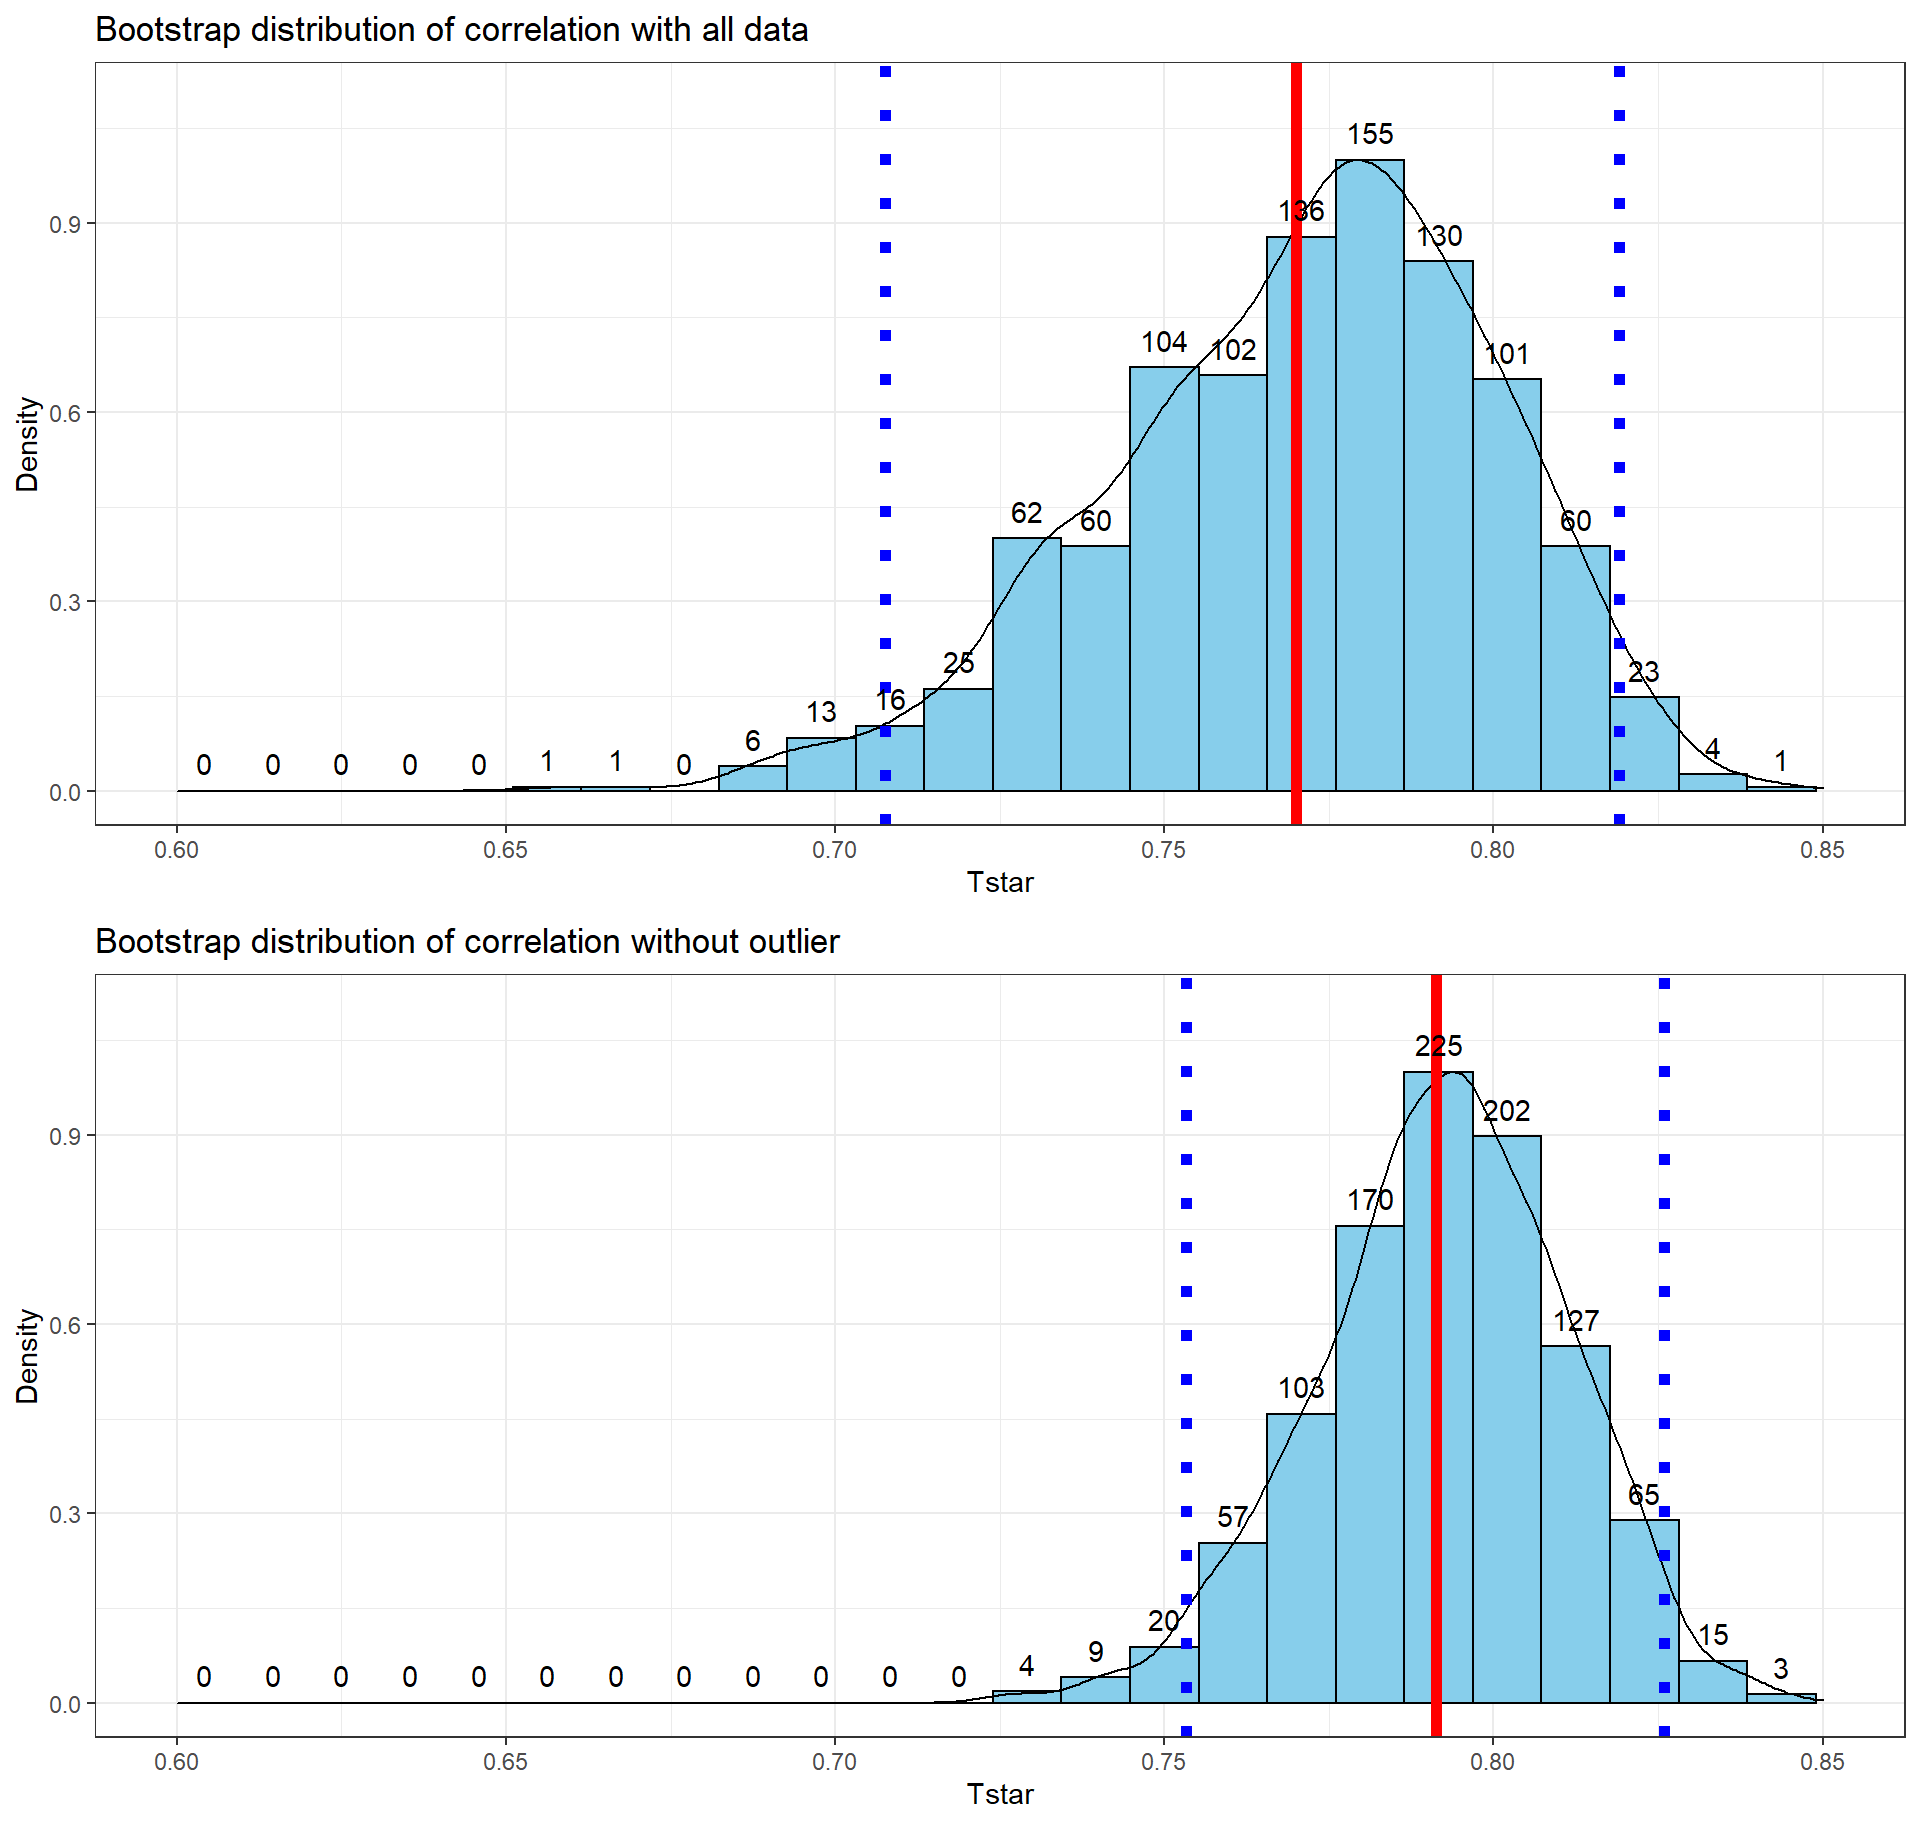 Bootstrap distributions of the correlation coefficient for the full data set (top) and without potential outlier included (bottom) with observed correlation (bold line) and bounds for the 95% confidence interval (dashed lines). Notice the change in spread of the bootstrap distributions as well as the different centers.